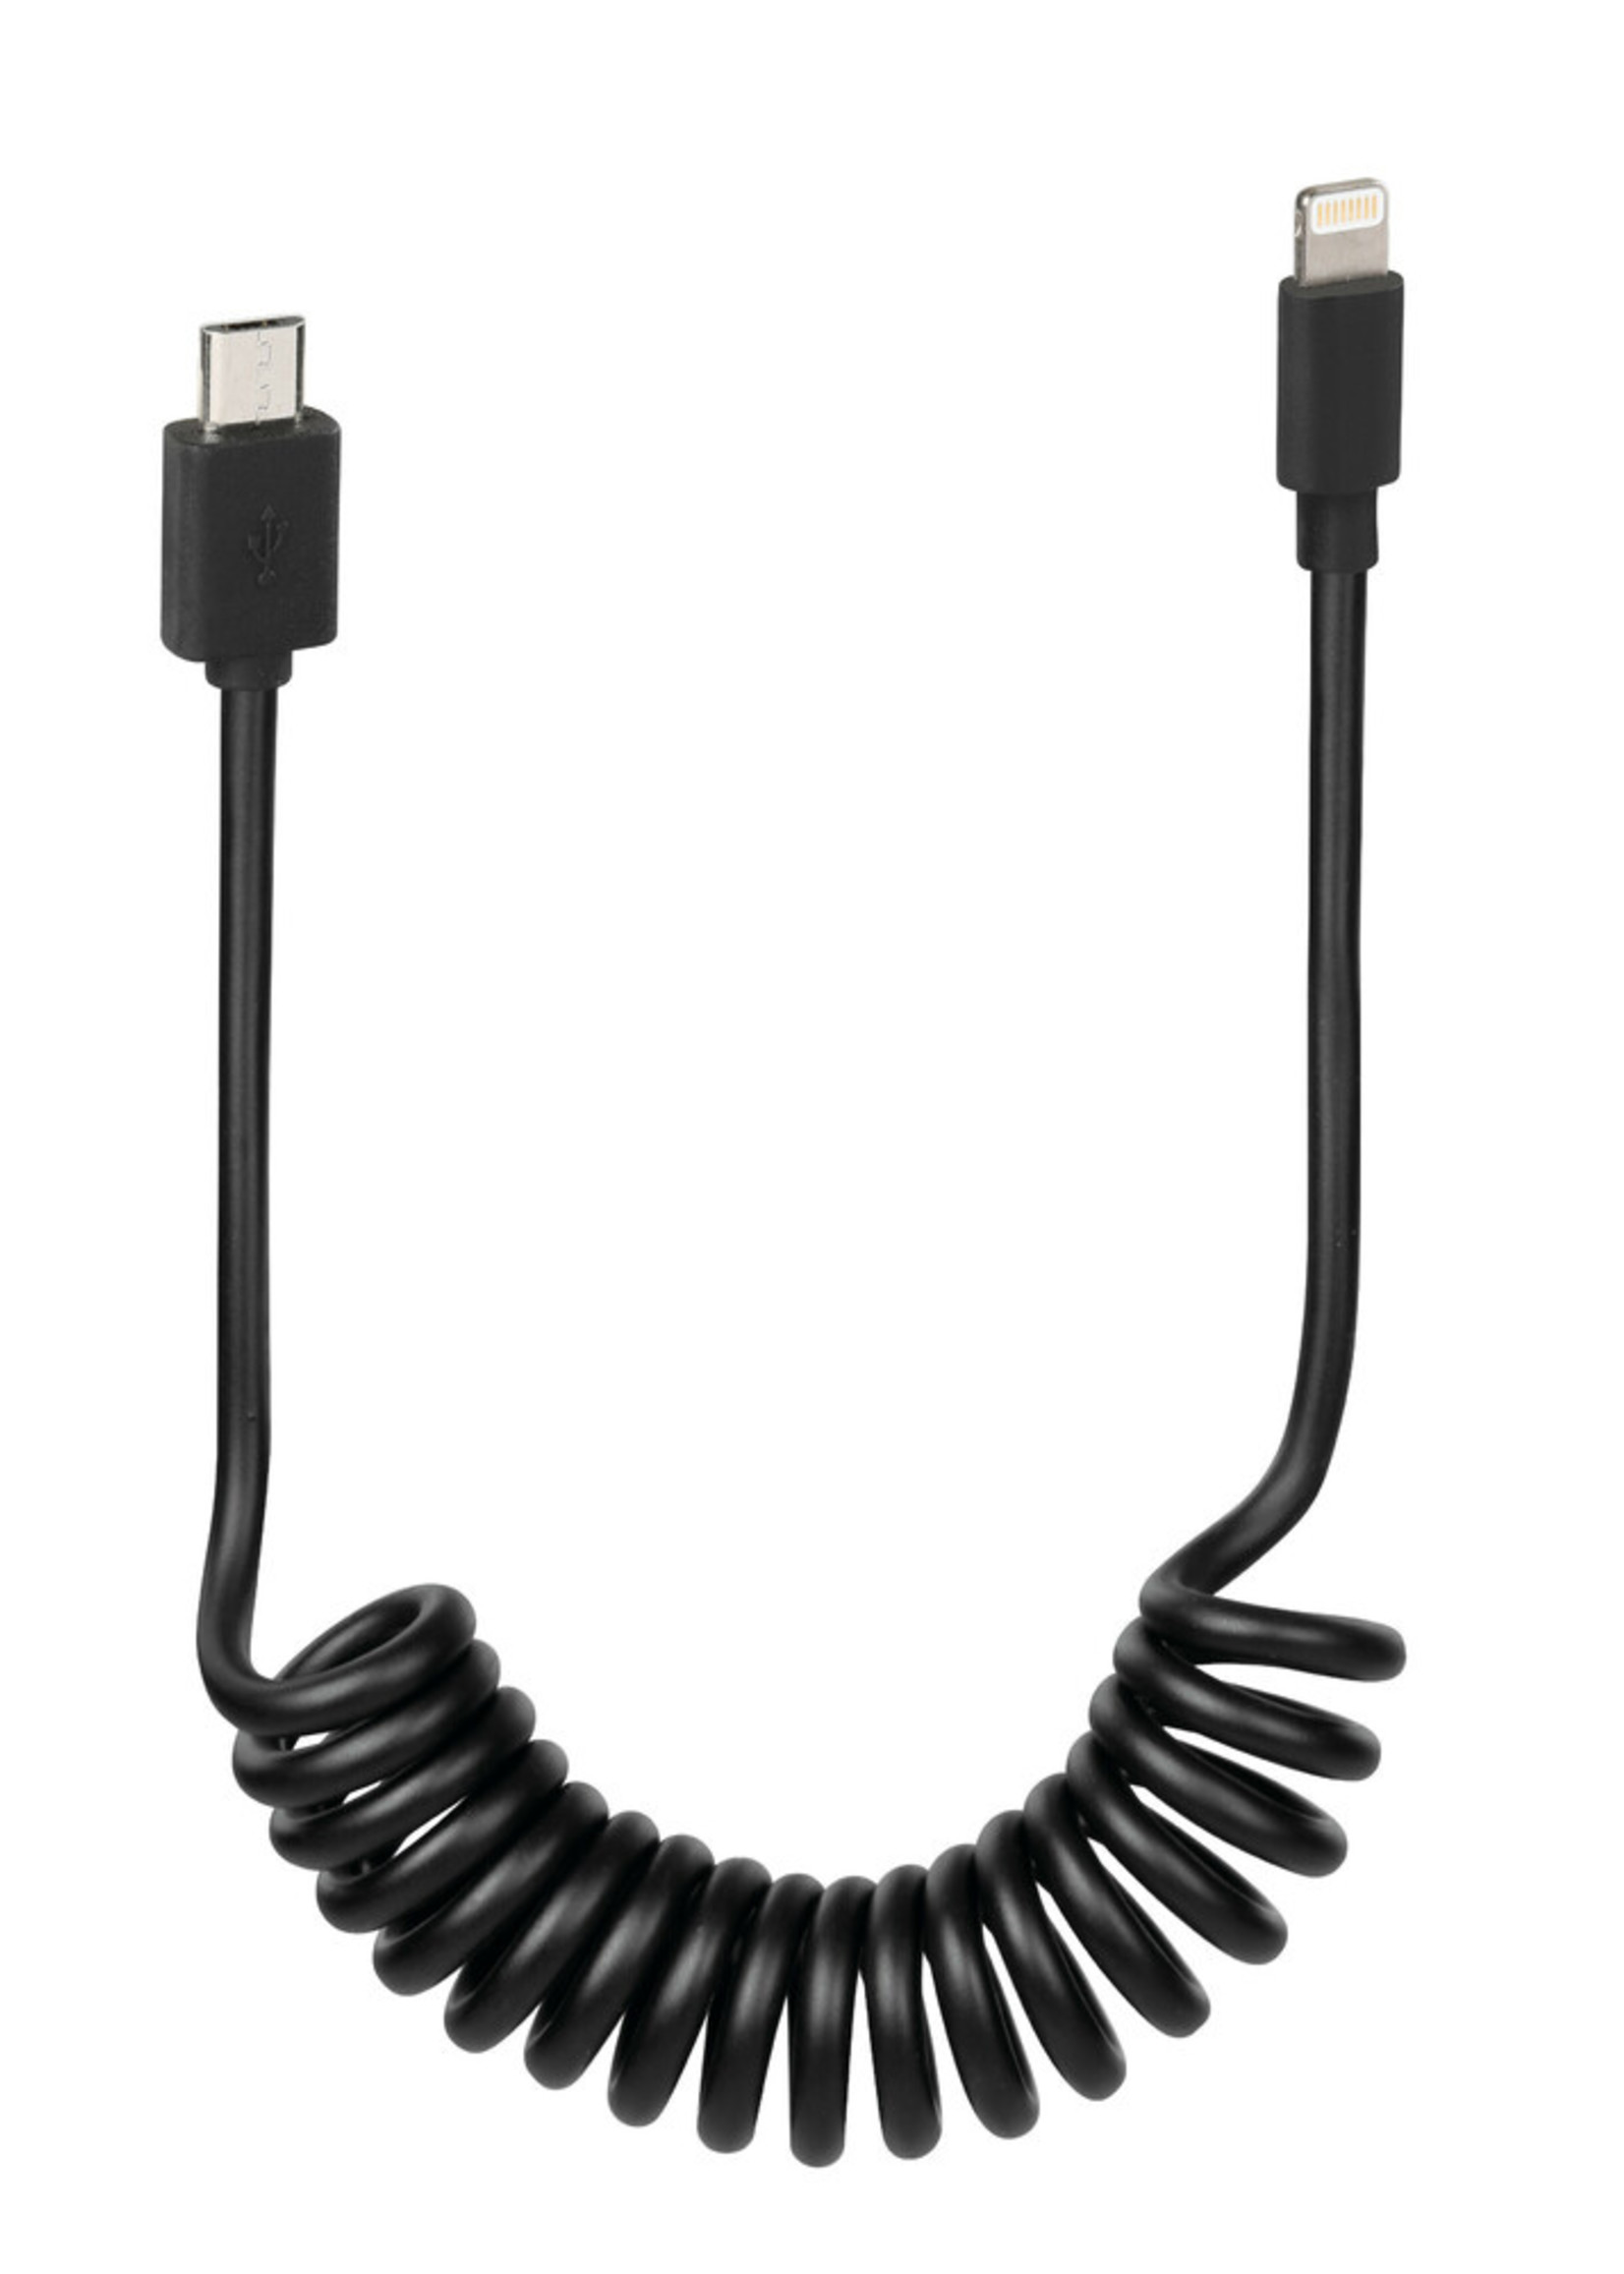 Optiline Spring cable for Ebike, Micro Usb > Apple 8 Pin